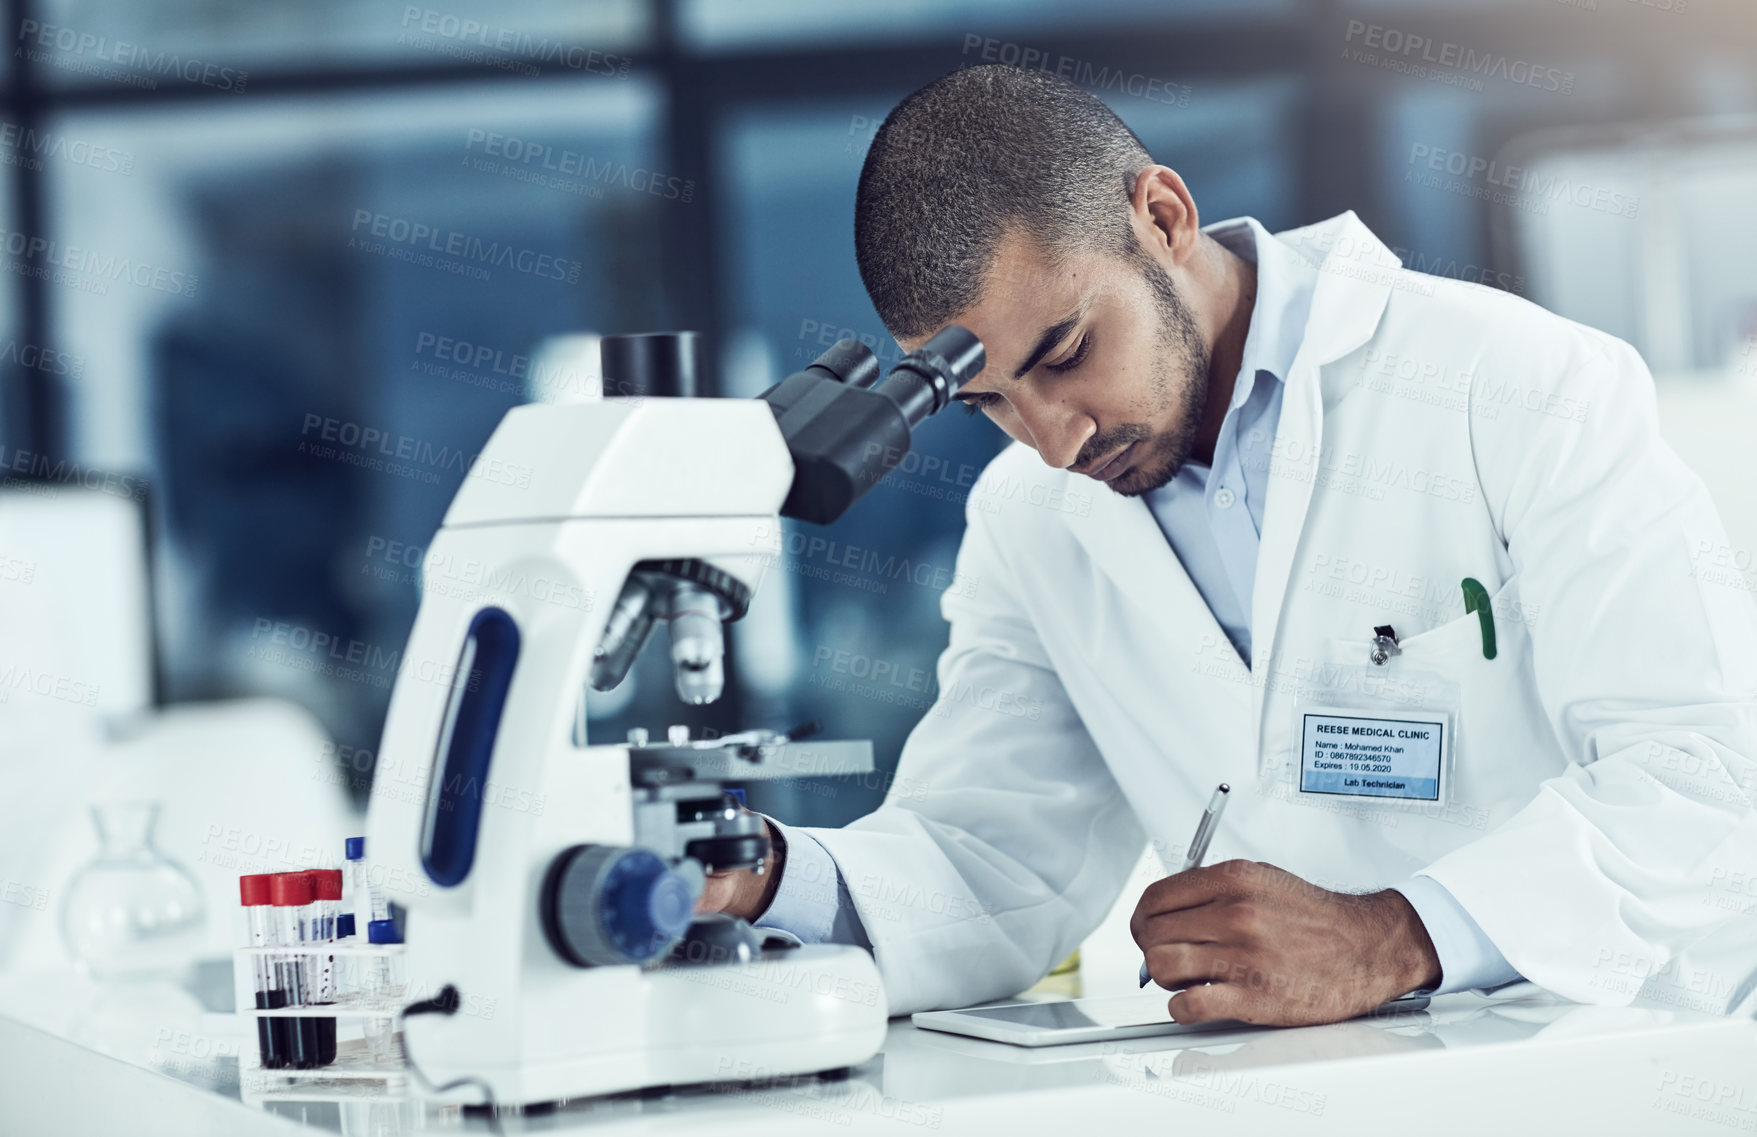 Buy stock photo Serious male scientist writing on a tablet for an online phd research paper in a lab. Laboratory worker working on health data for a science journal. Medical professional analyzing test results
